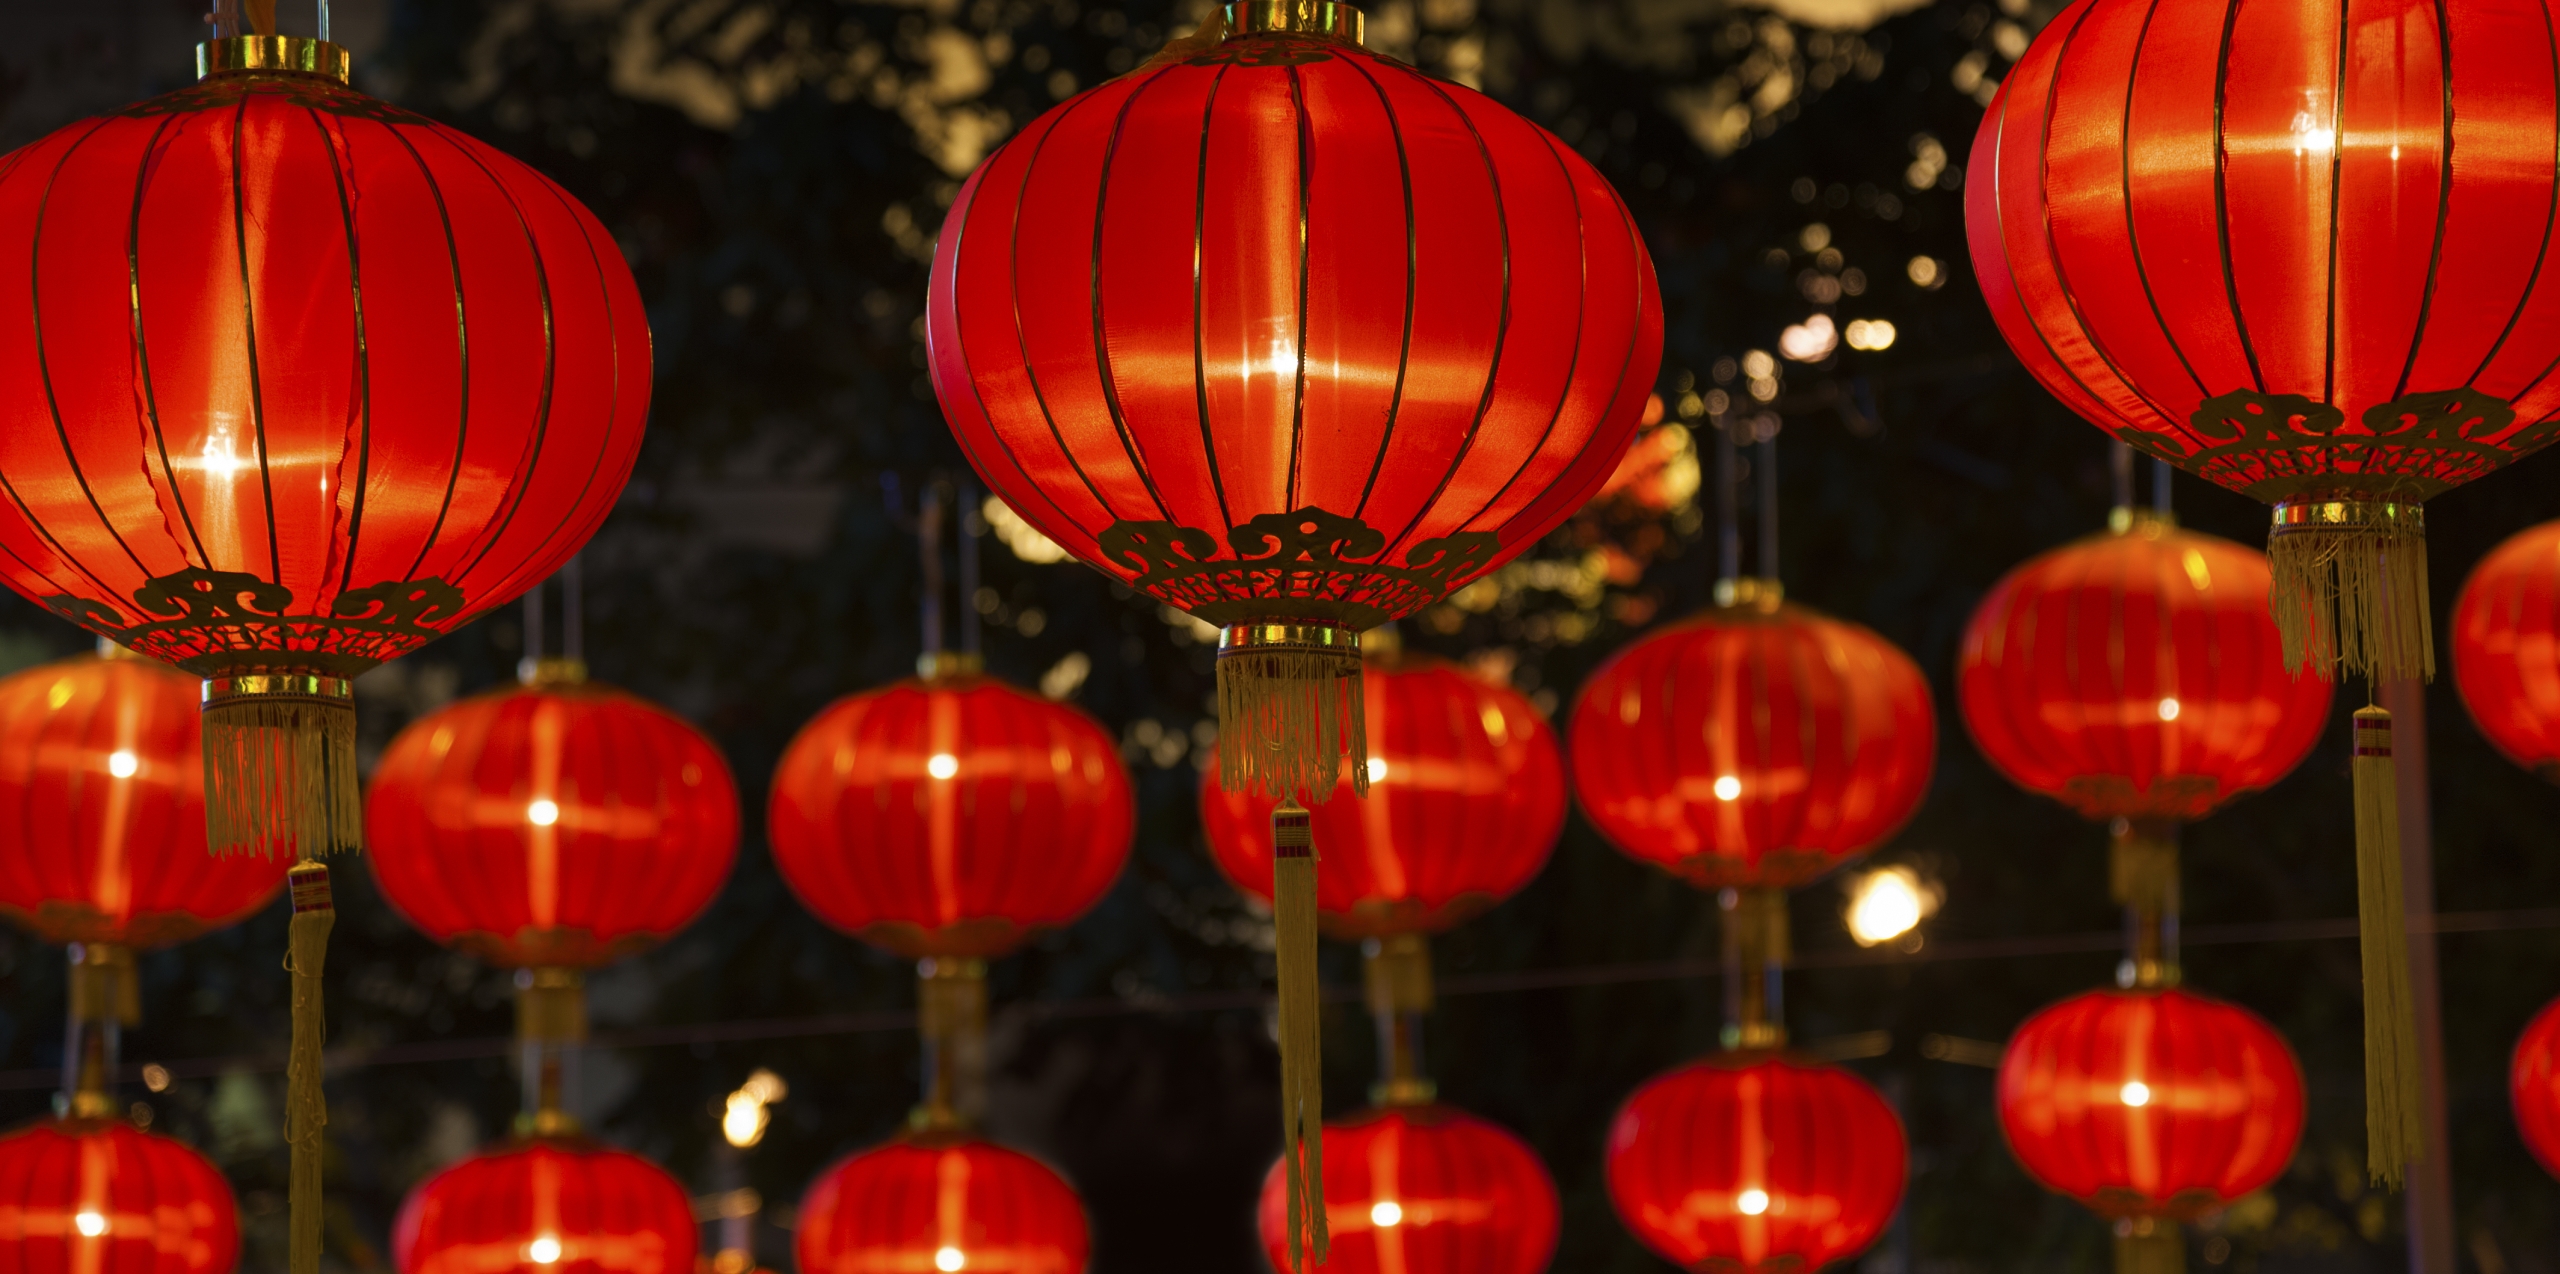 Stay + Play Lunar New Year Festival at The Inn at Stone Mountain Park